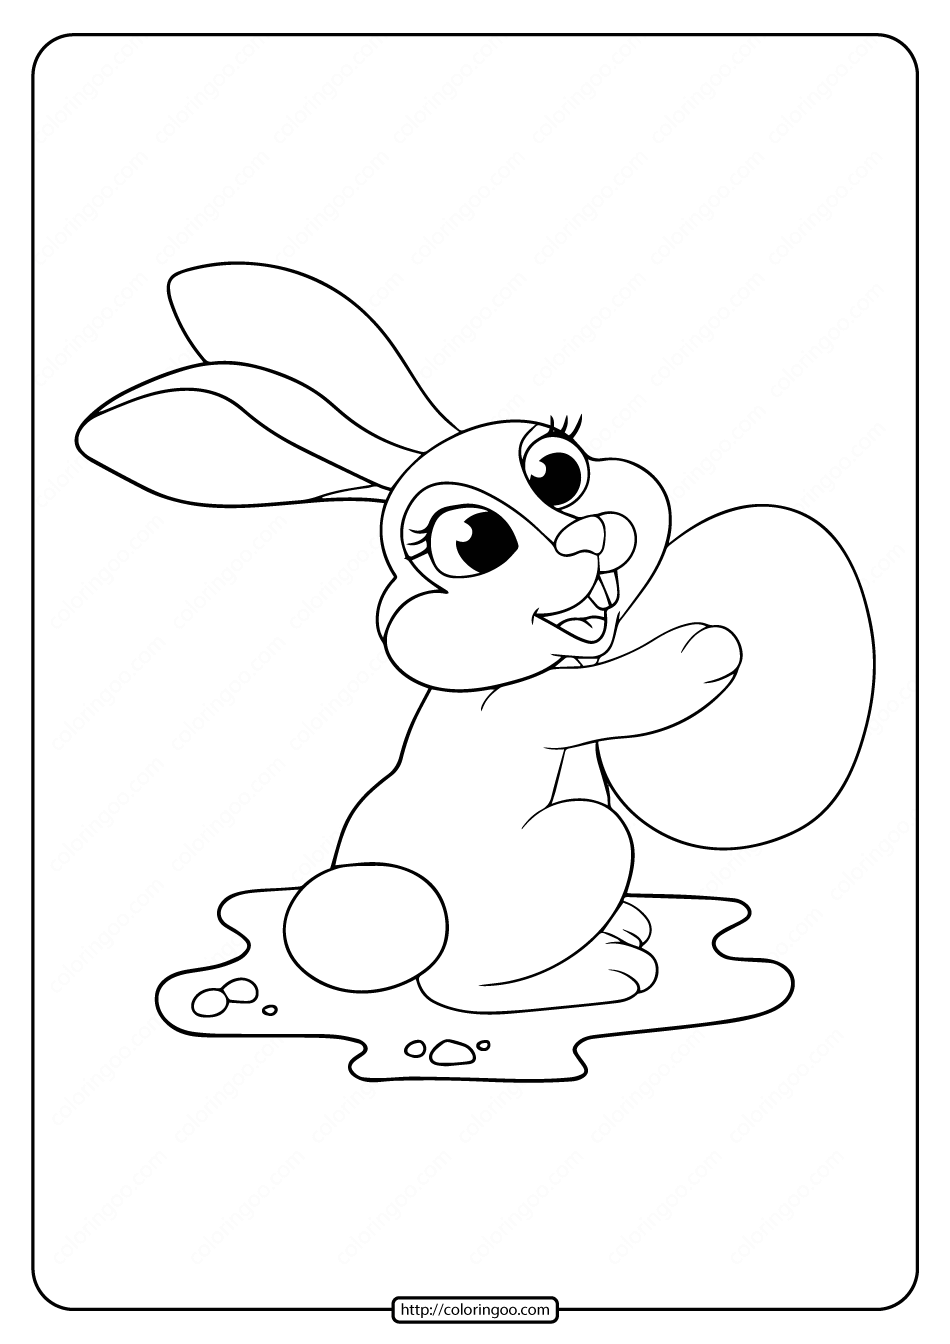 printable big easter egg rabbit coloring pages